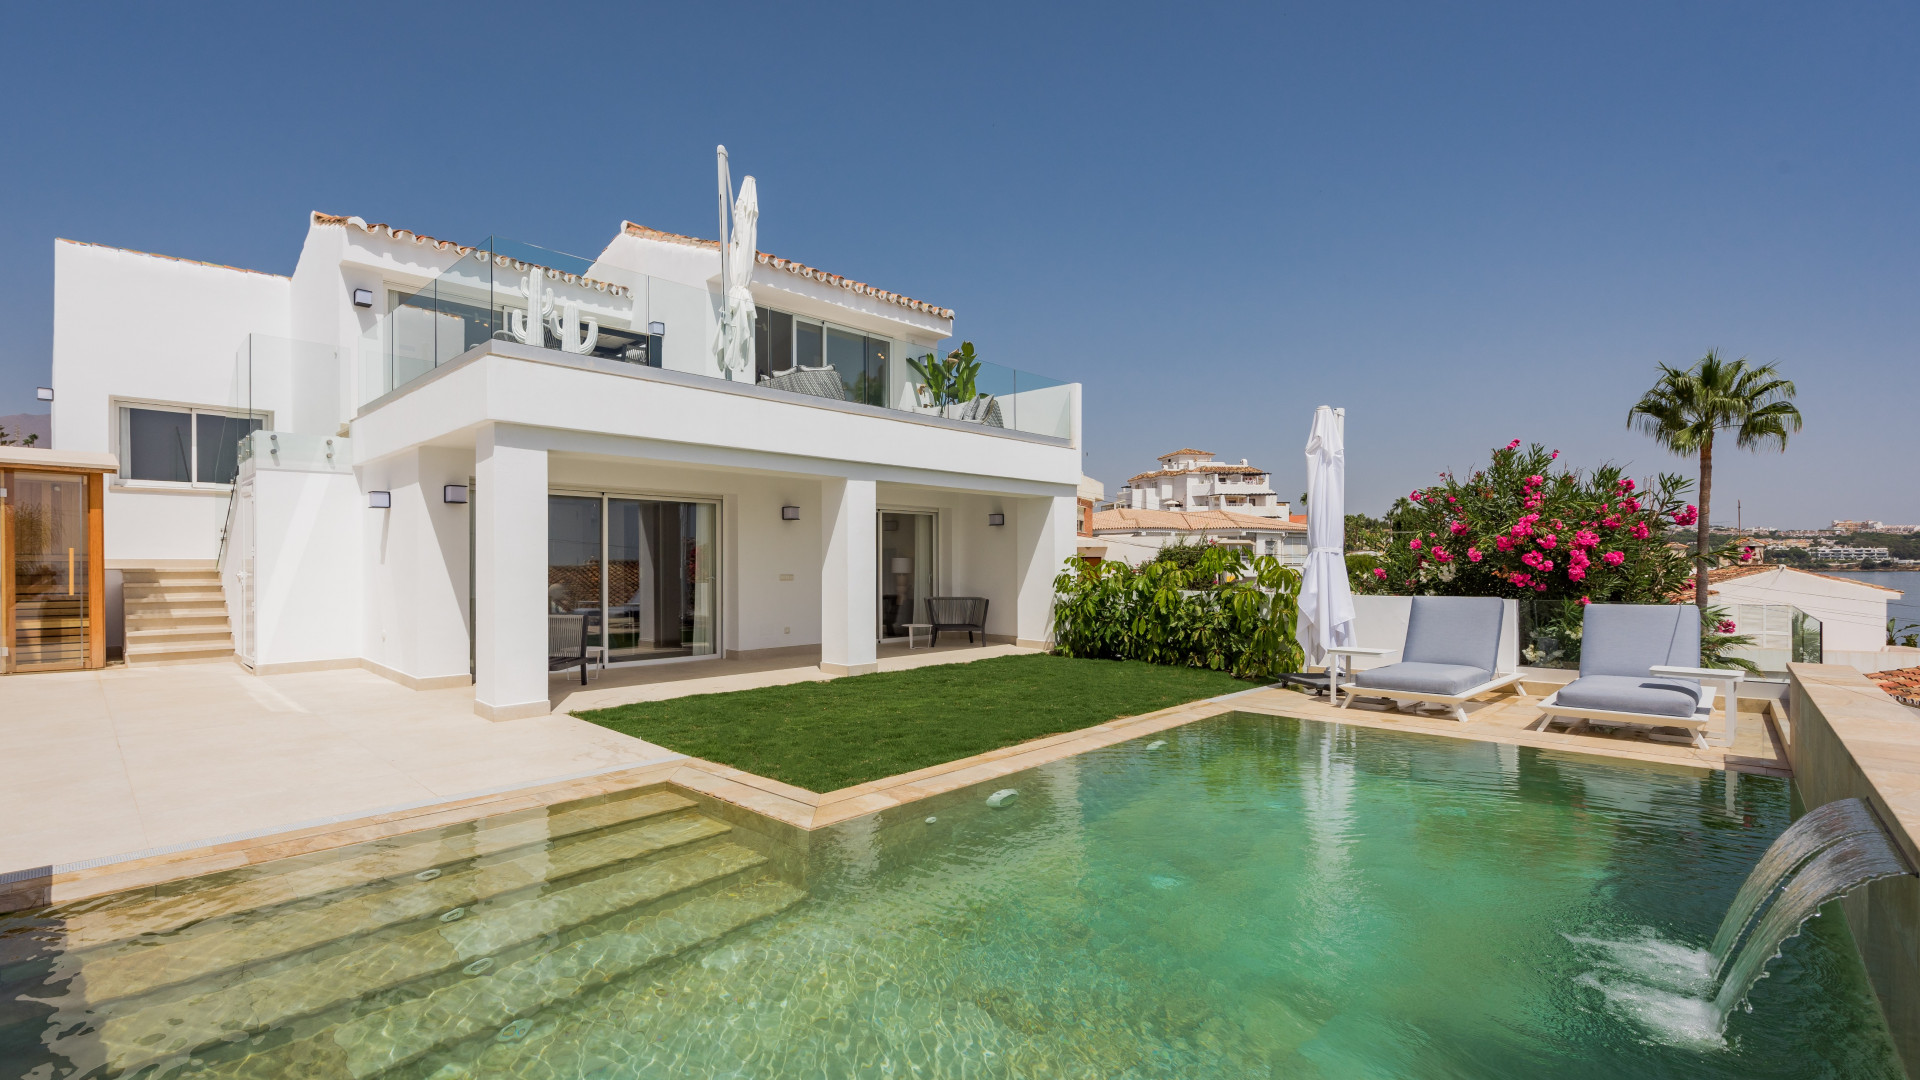 Fully renovated frontline beach villa located west of Estepona